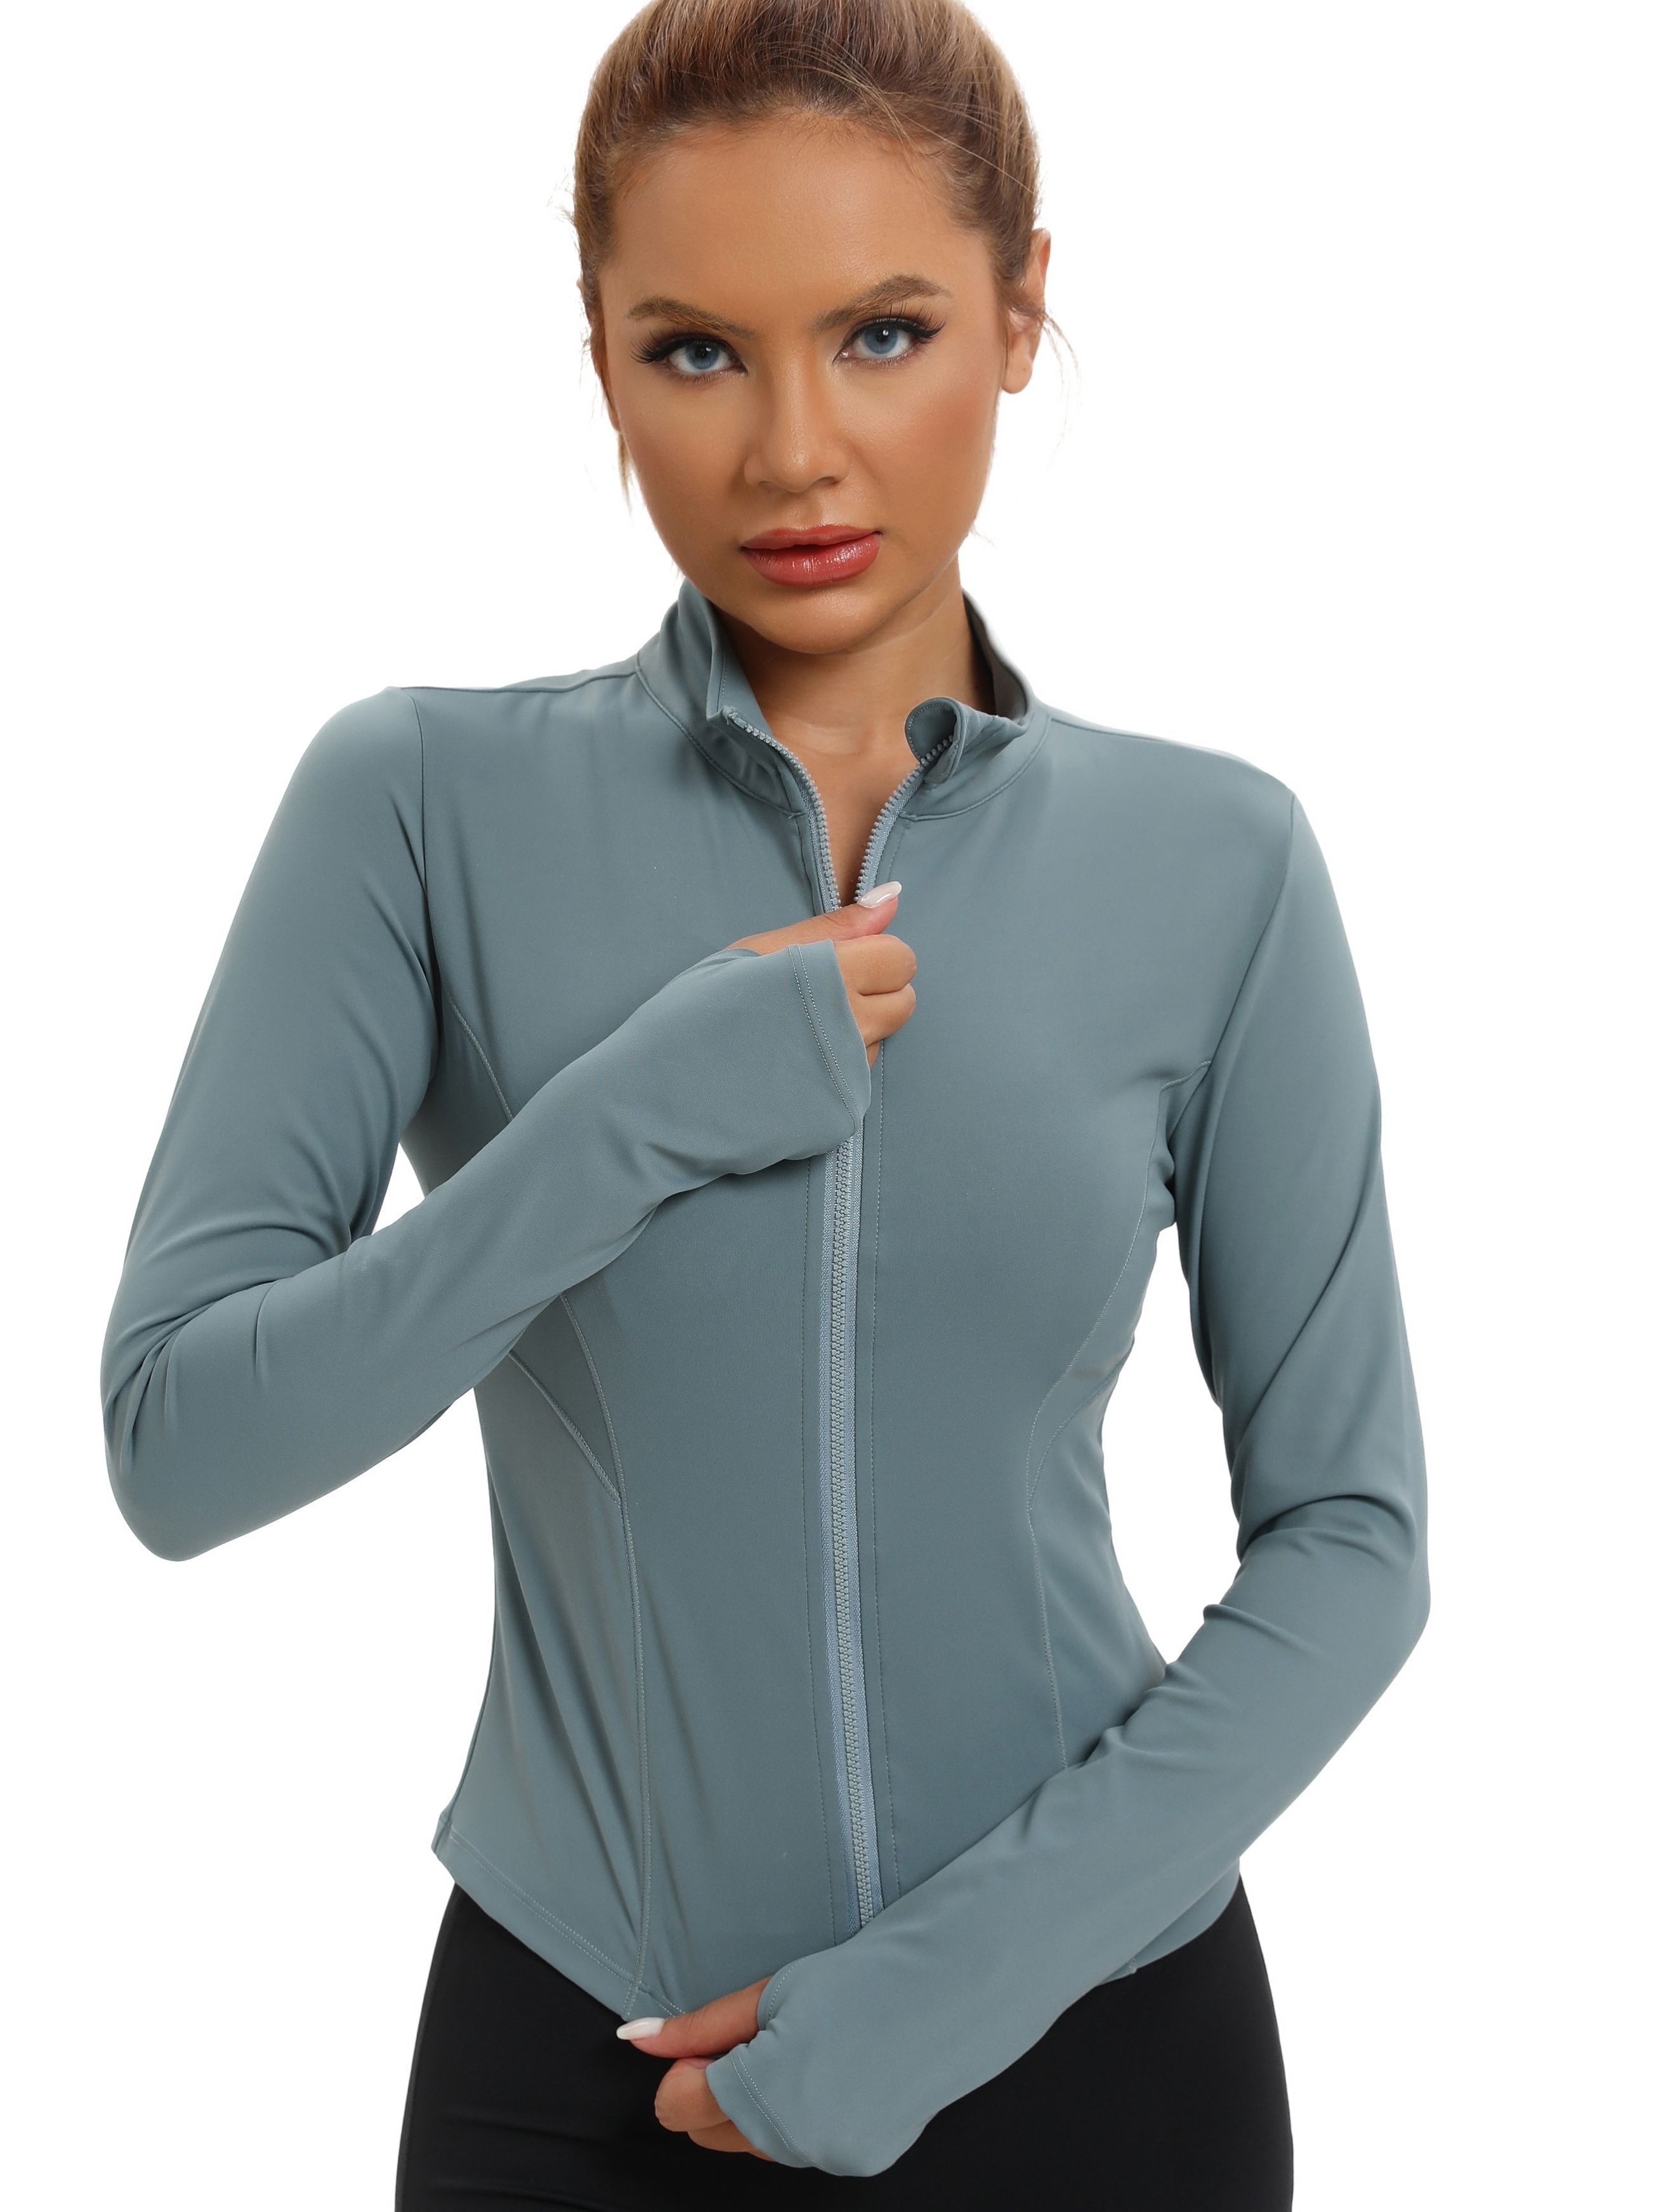 Seamless Long Sleeve Stretch Crop Top For Women Perfect For Yoga, Running,  And Fitness Workouts With Thumb Holes And Half Zip Stylish And Comfortable  Long Sleeve Sports Top For Ladies From Fashionchinaclothes